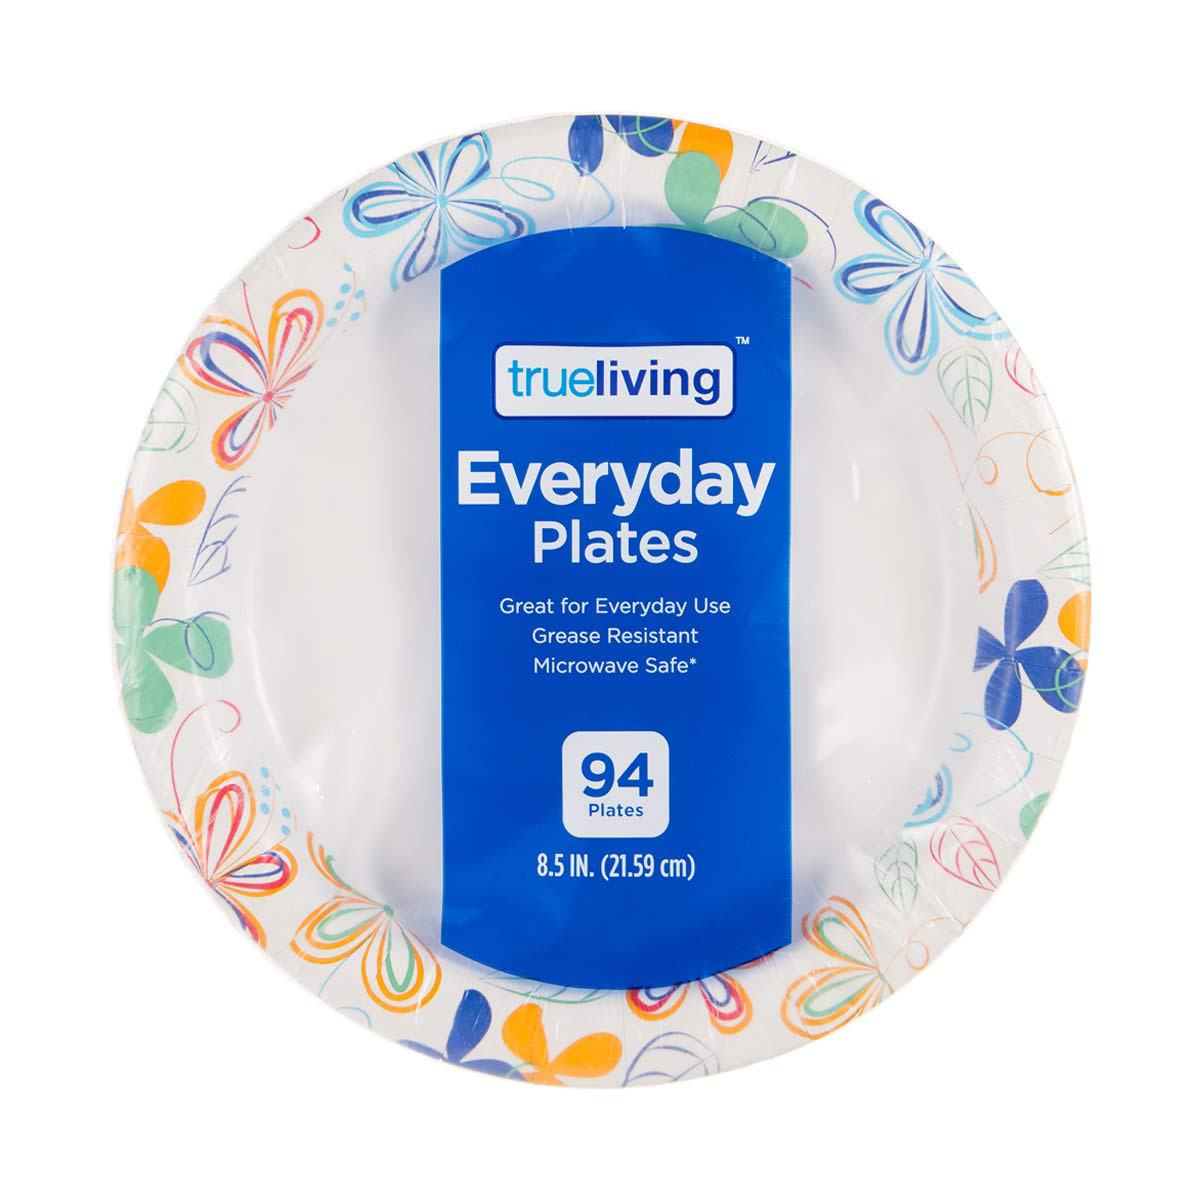 True Living Everyday Paper Plates, 8.5 in, 94 plates